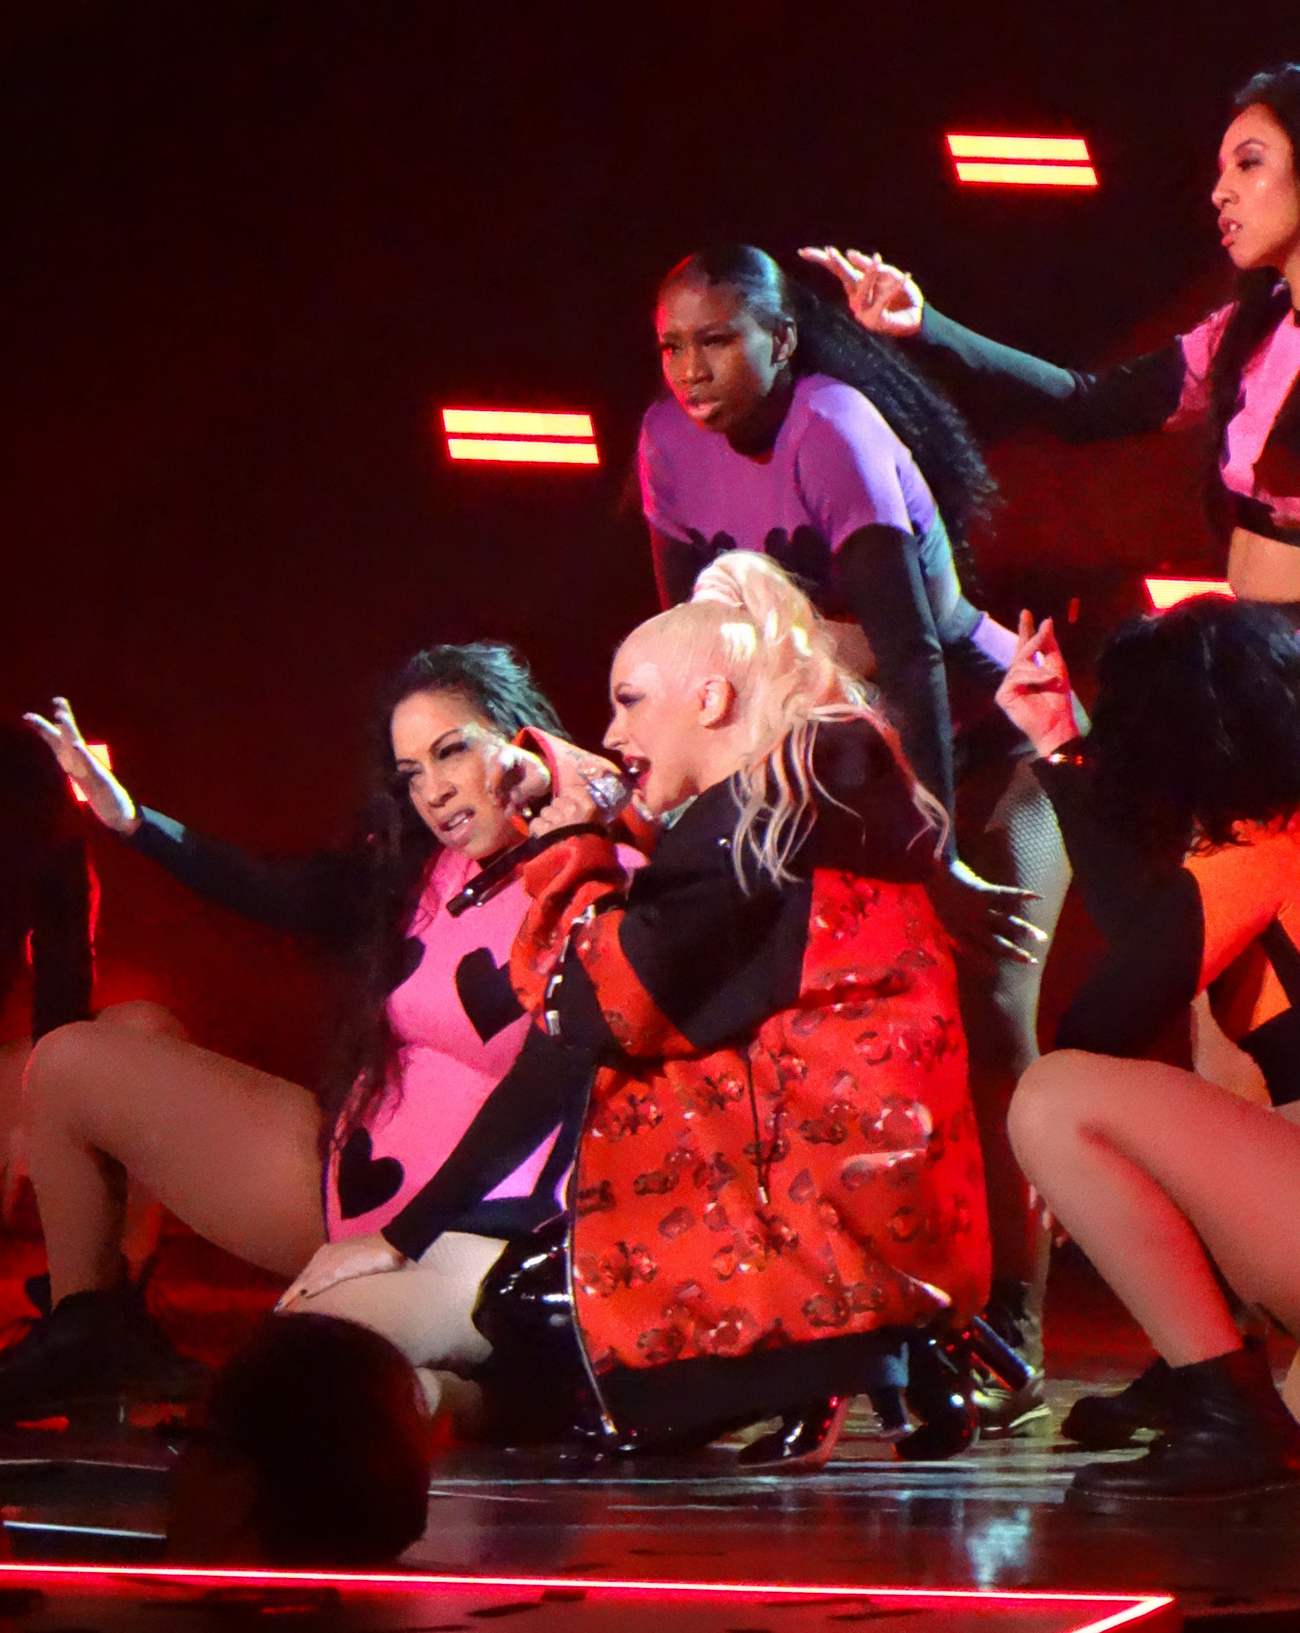 Christina_Aguilera_-_performing_for_a_New_Year_s_Eve_Performance_at_Zappos_Theatre_in_Las_Vegas2C_NV__12312019-55.jpg